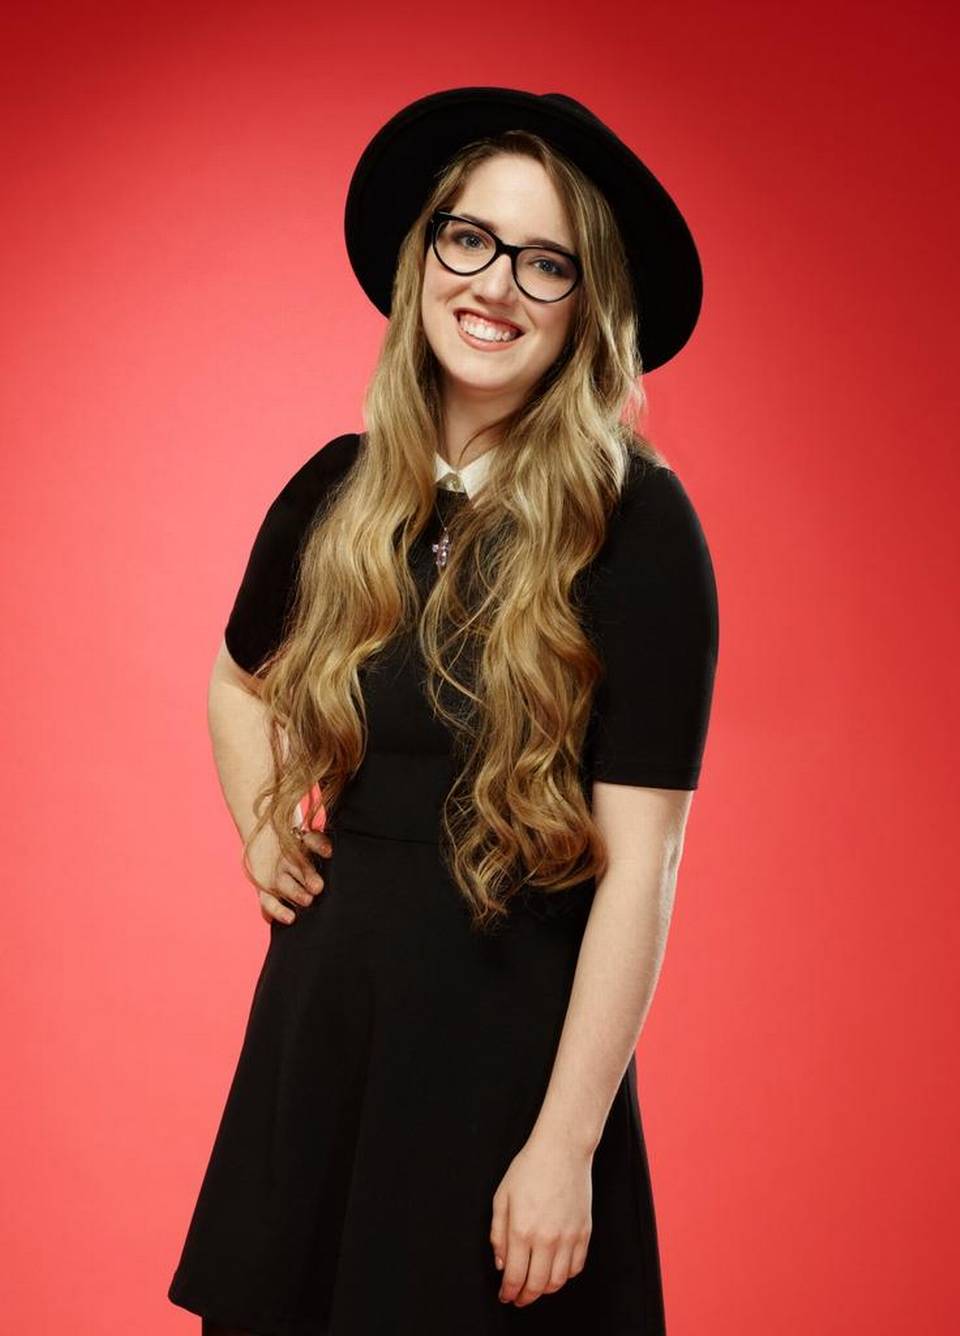 Miami student belts it out on ‘The Voice’ | Miami Herald